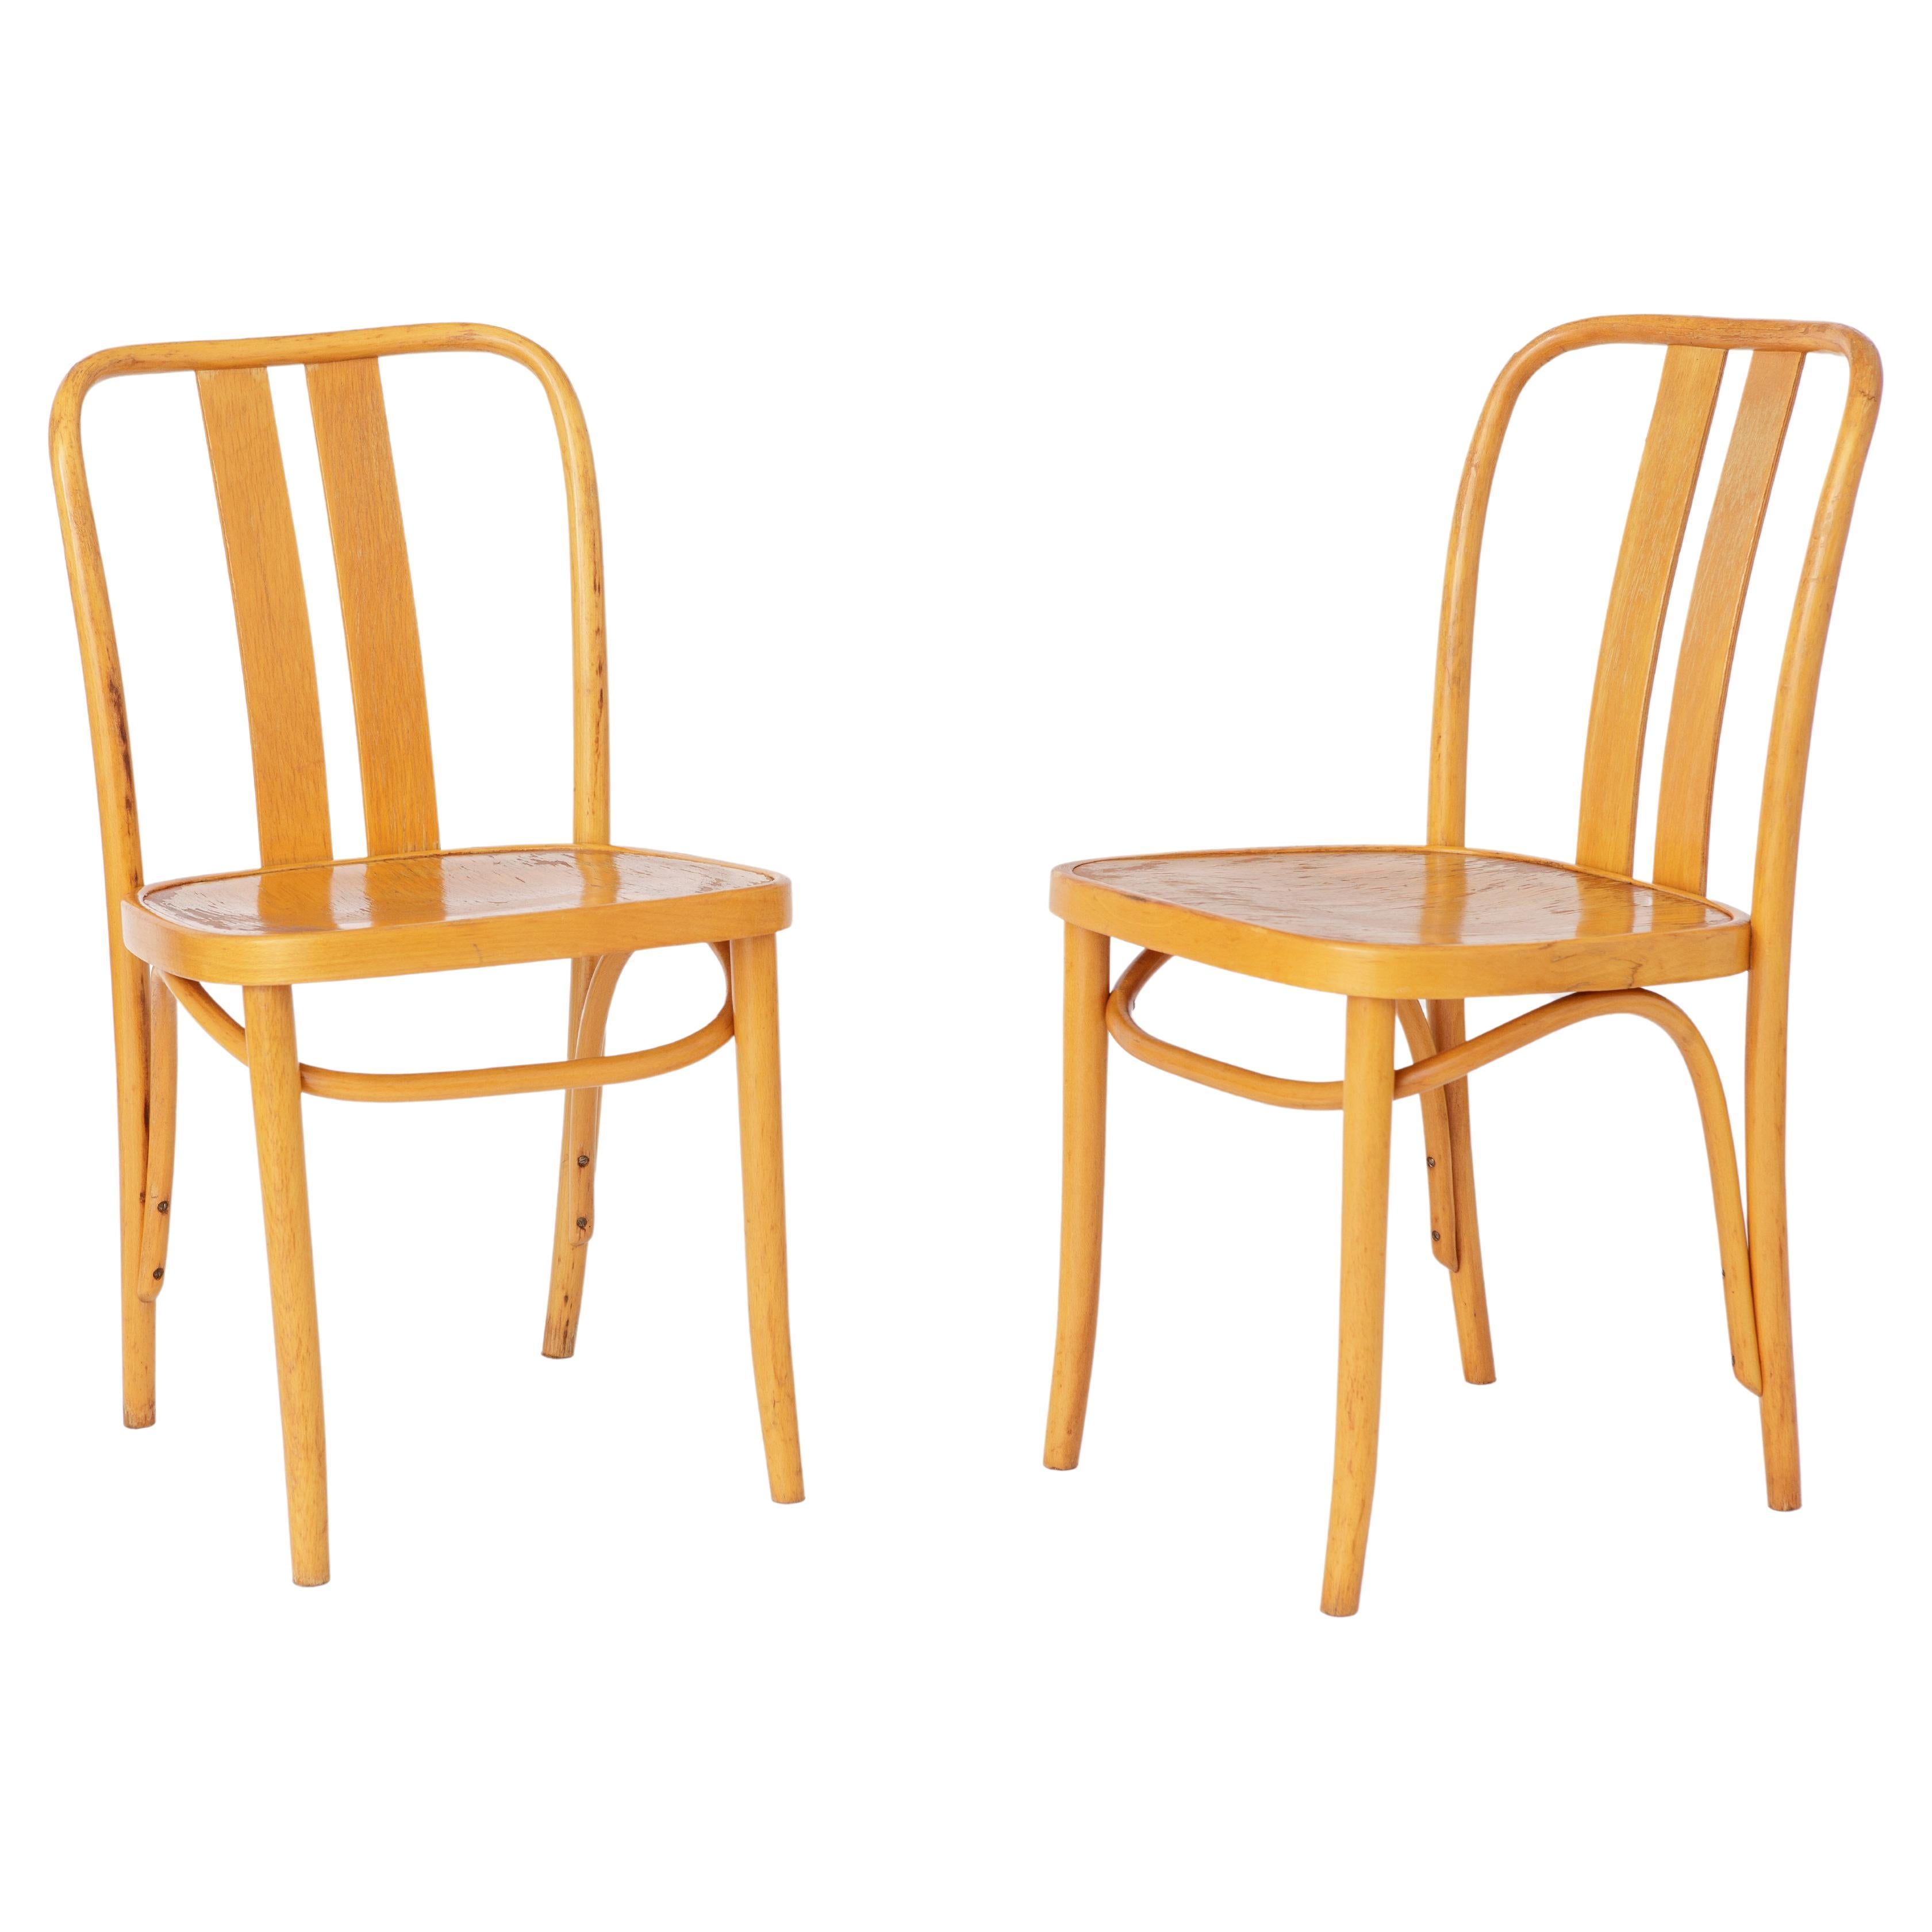 2 Vintage IKEA Chairs Lena by Radomsko 1970s Bentwood For Sale